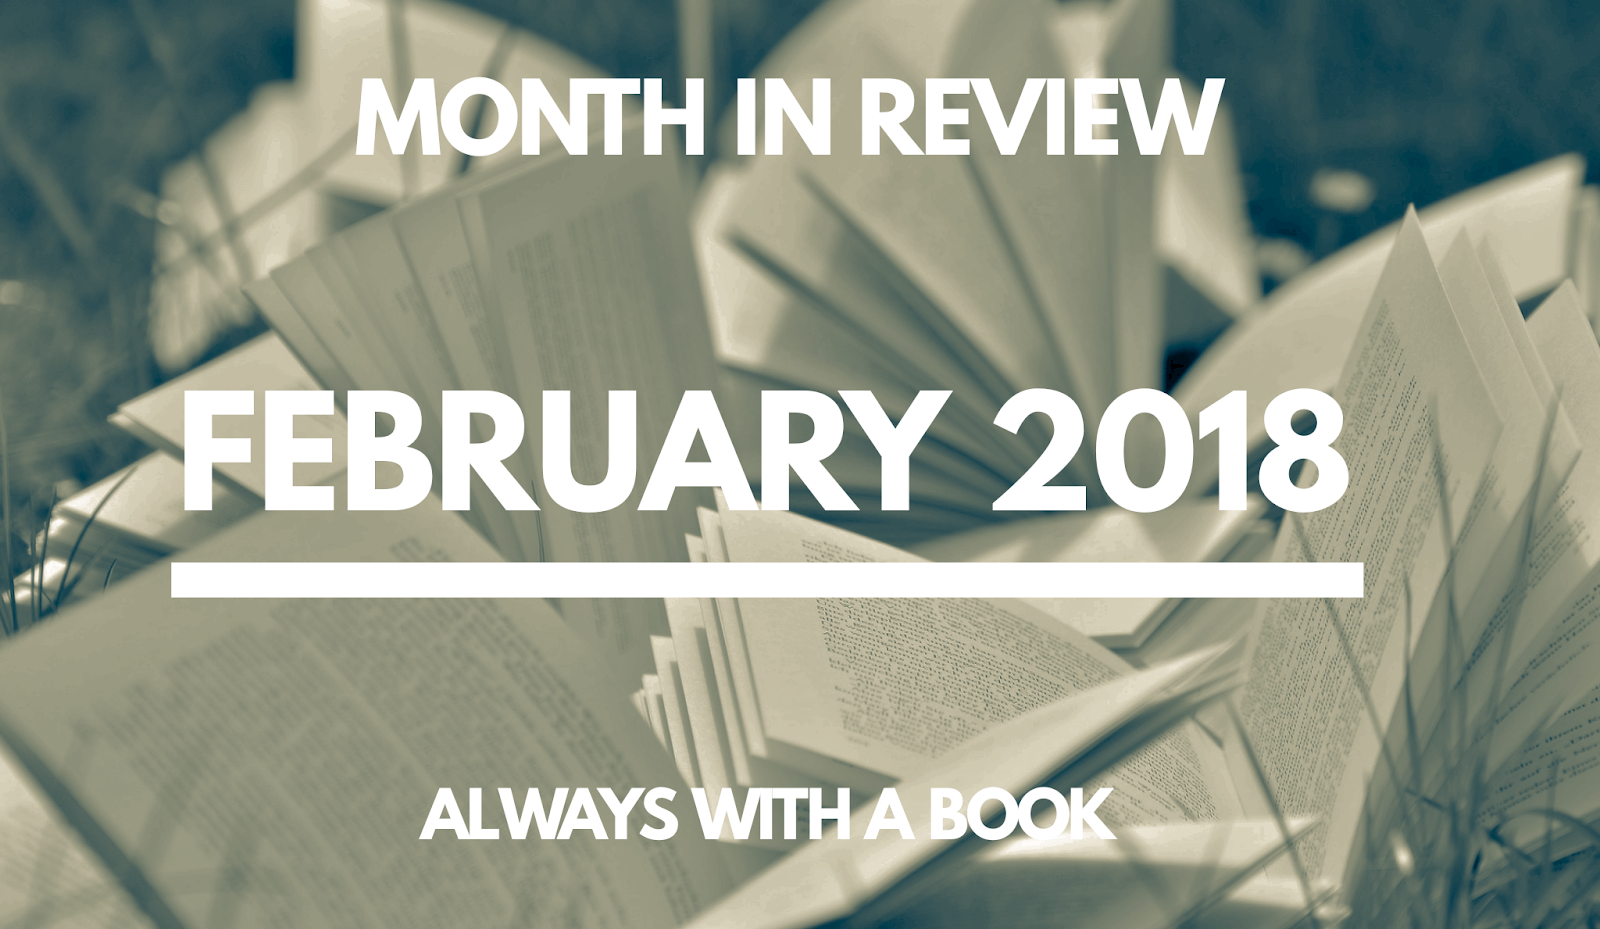 Month in Review: February 2018